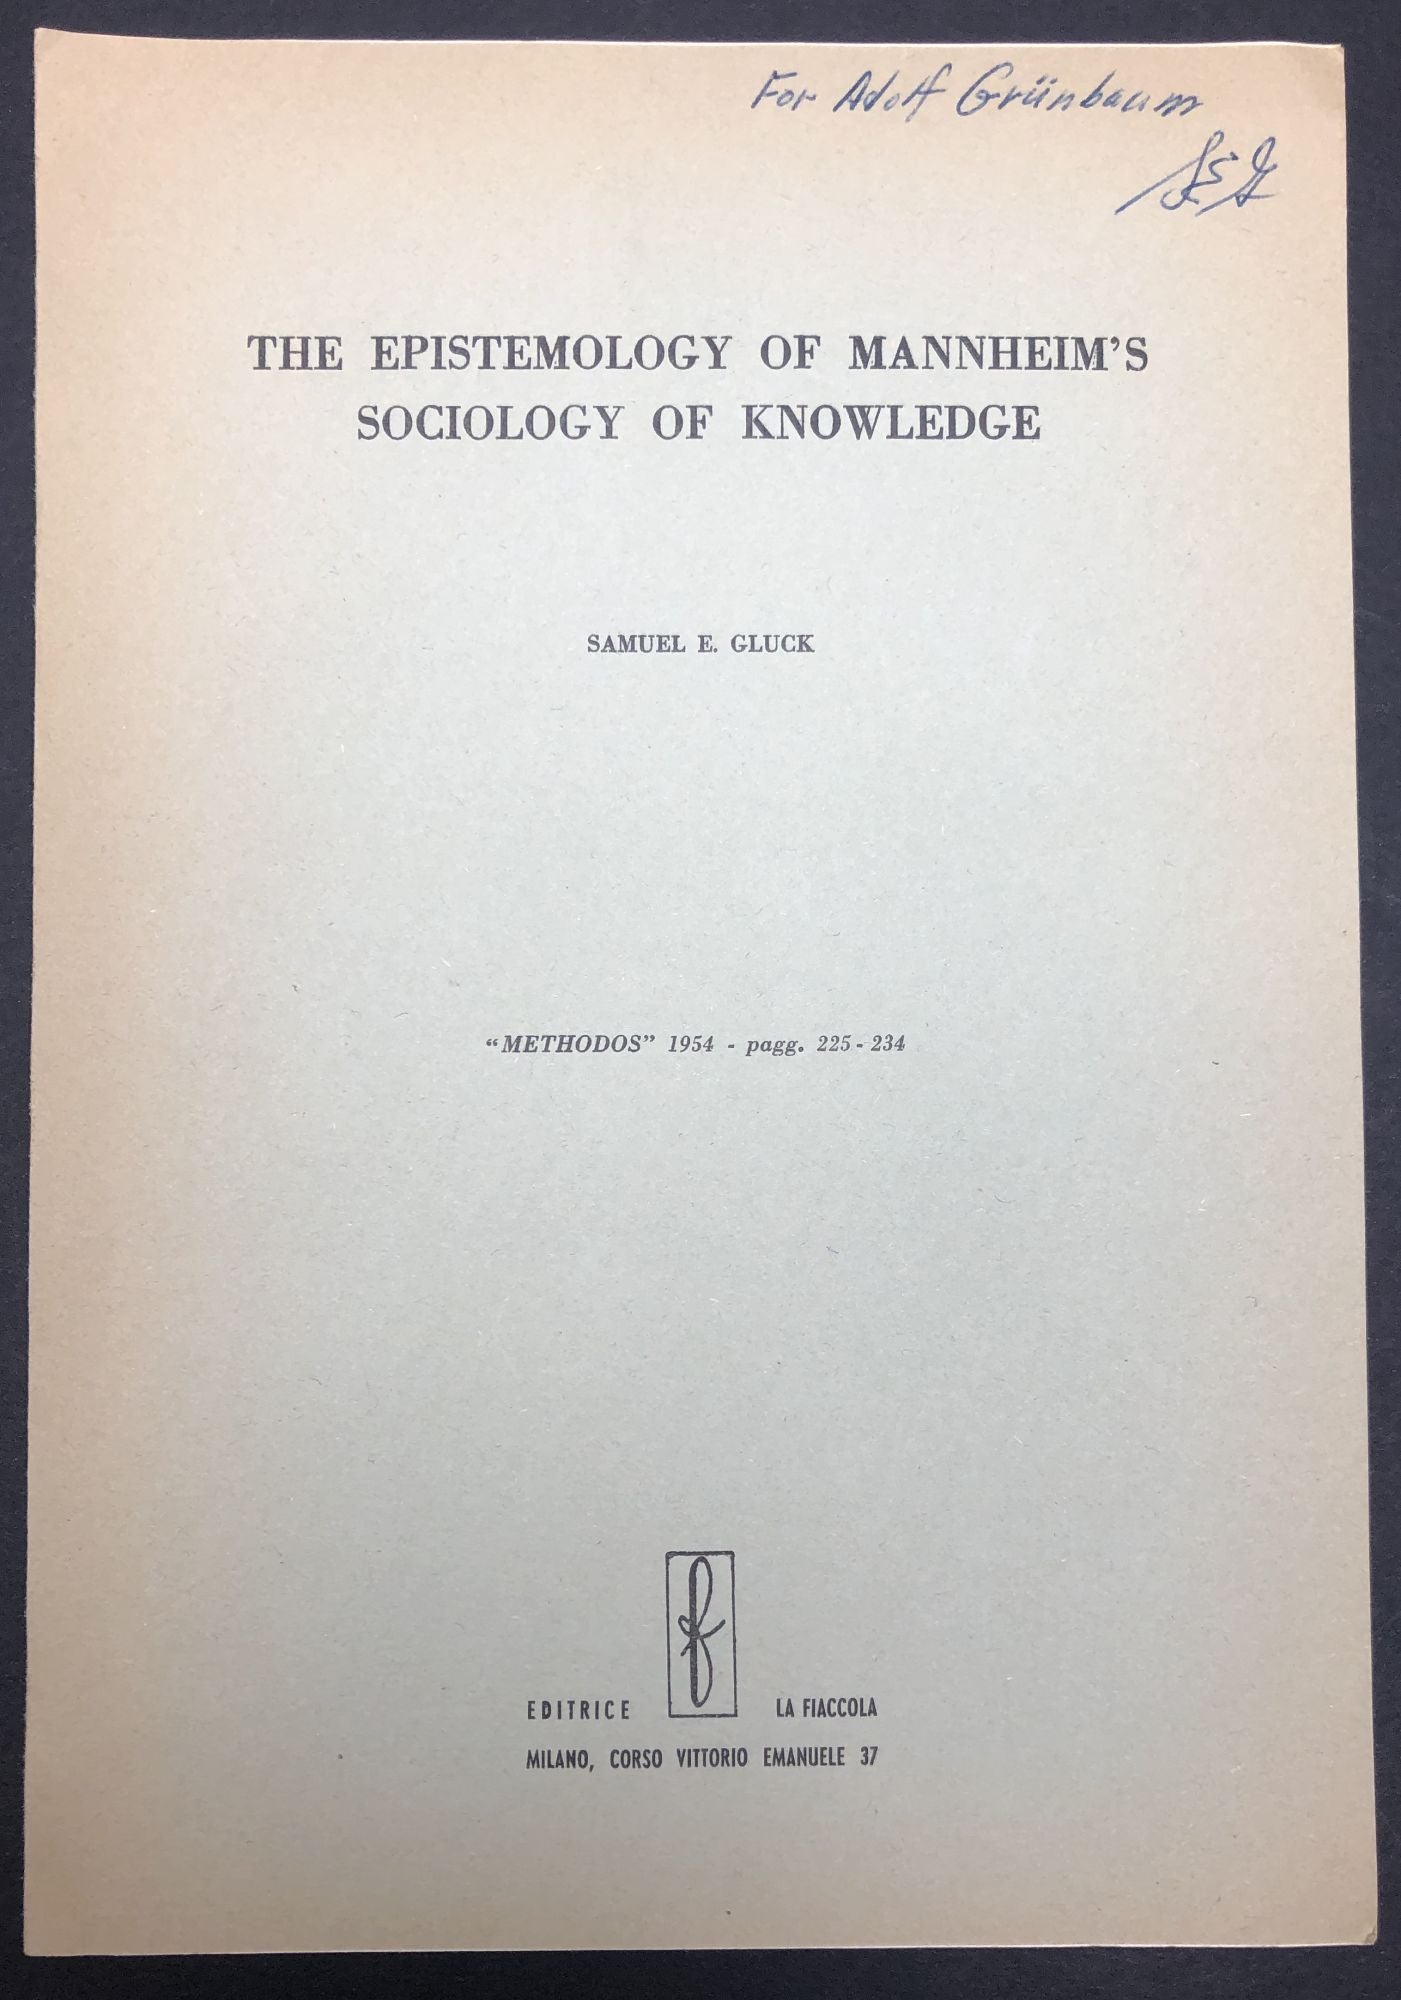 The Epistemology of Mannheim's Sociology of Knowledge, inscribed to ...